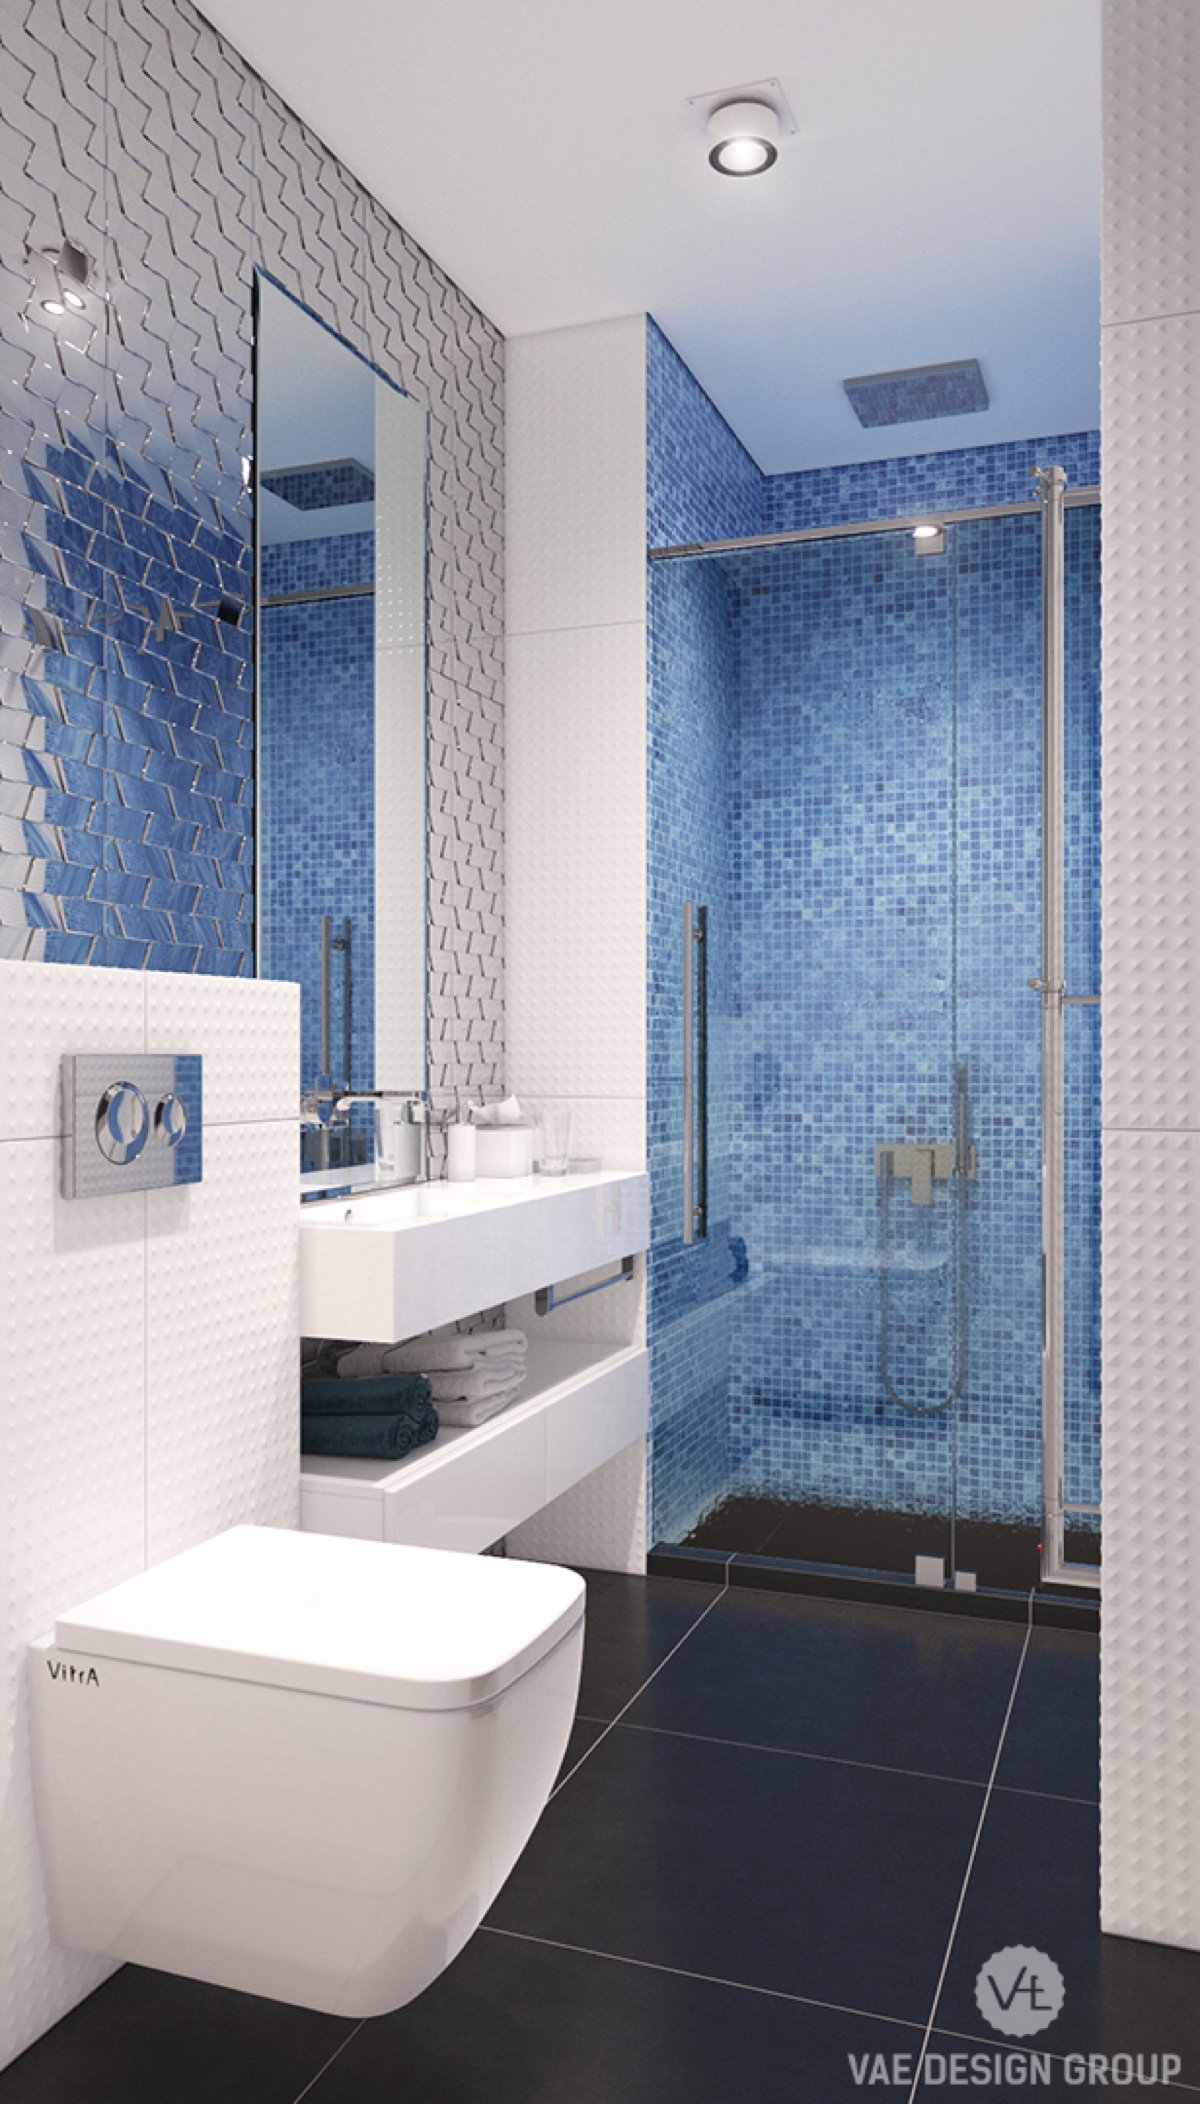 The family bathroom harks to the marine in an understated way. Metallic silver panelling behind the mirror extends it, reminiscent of fish scales. Electric blue tiling says swim, and textured white tiling ties it all together.